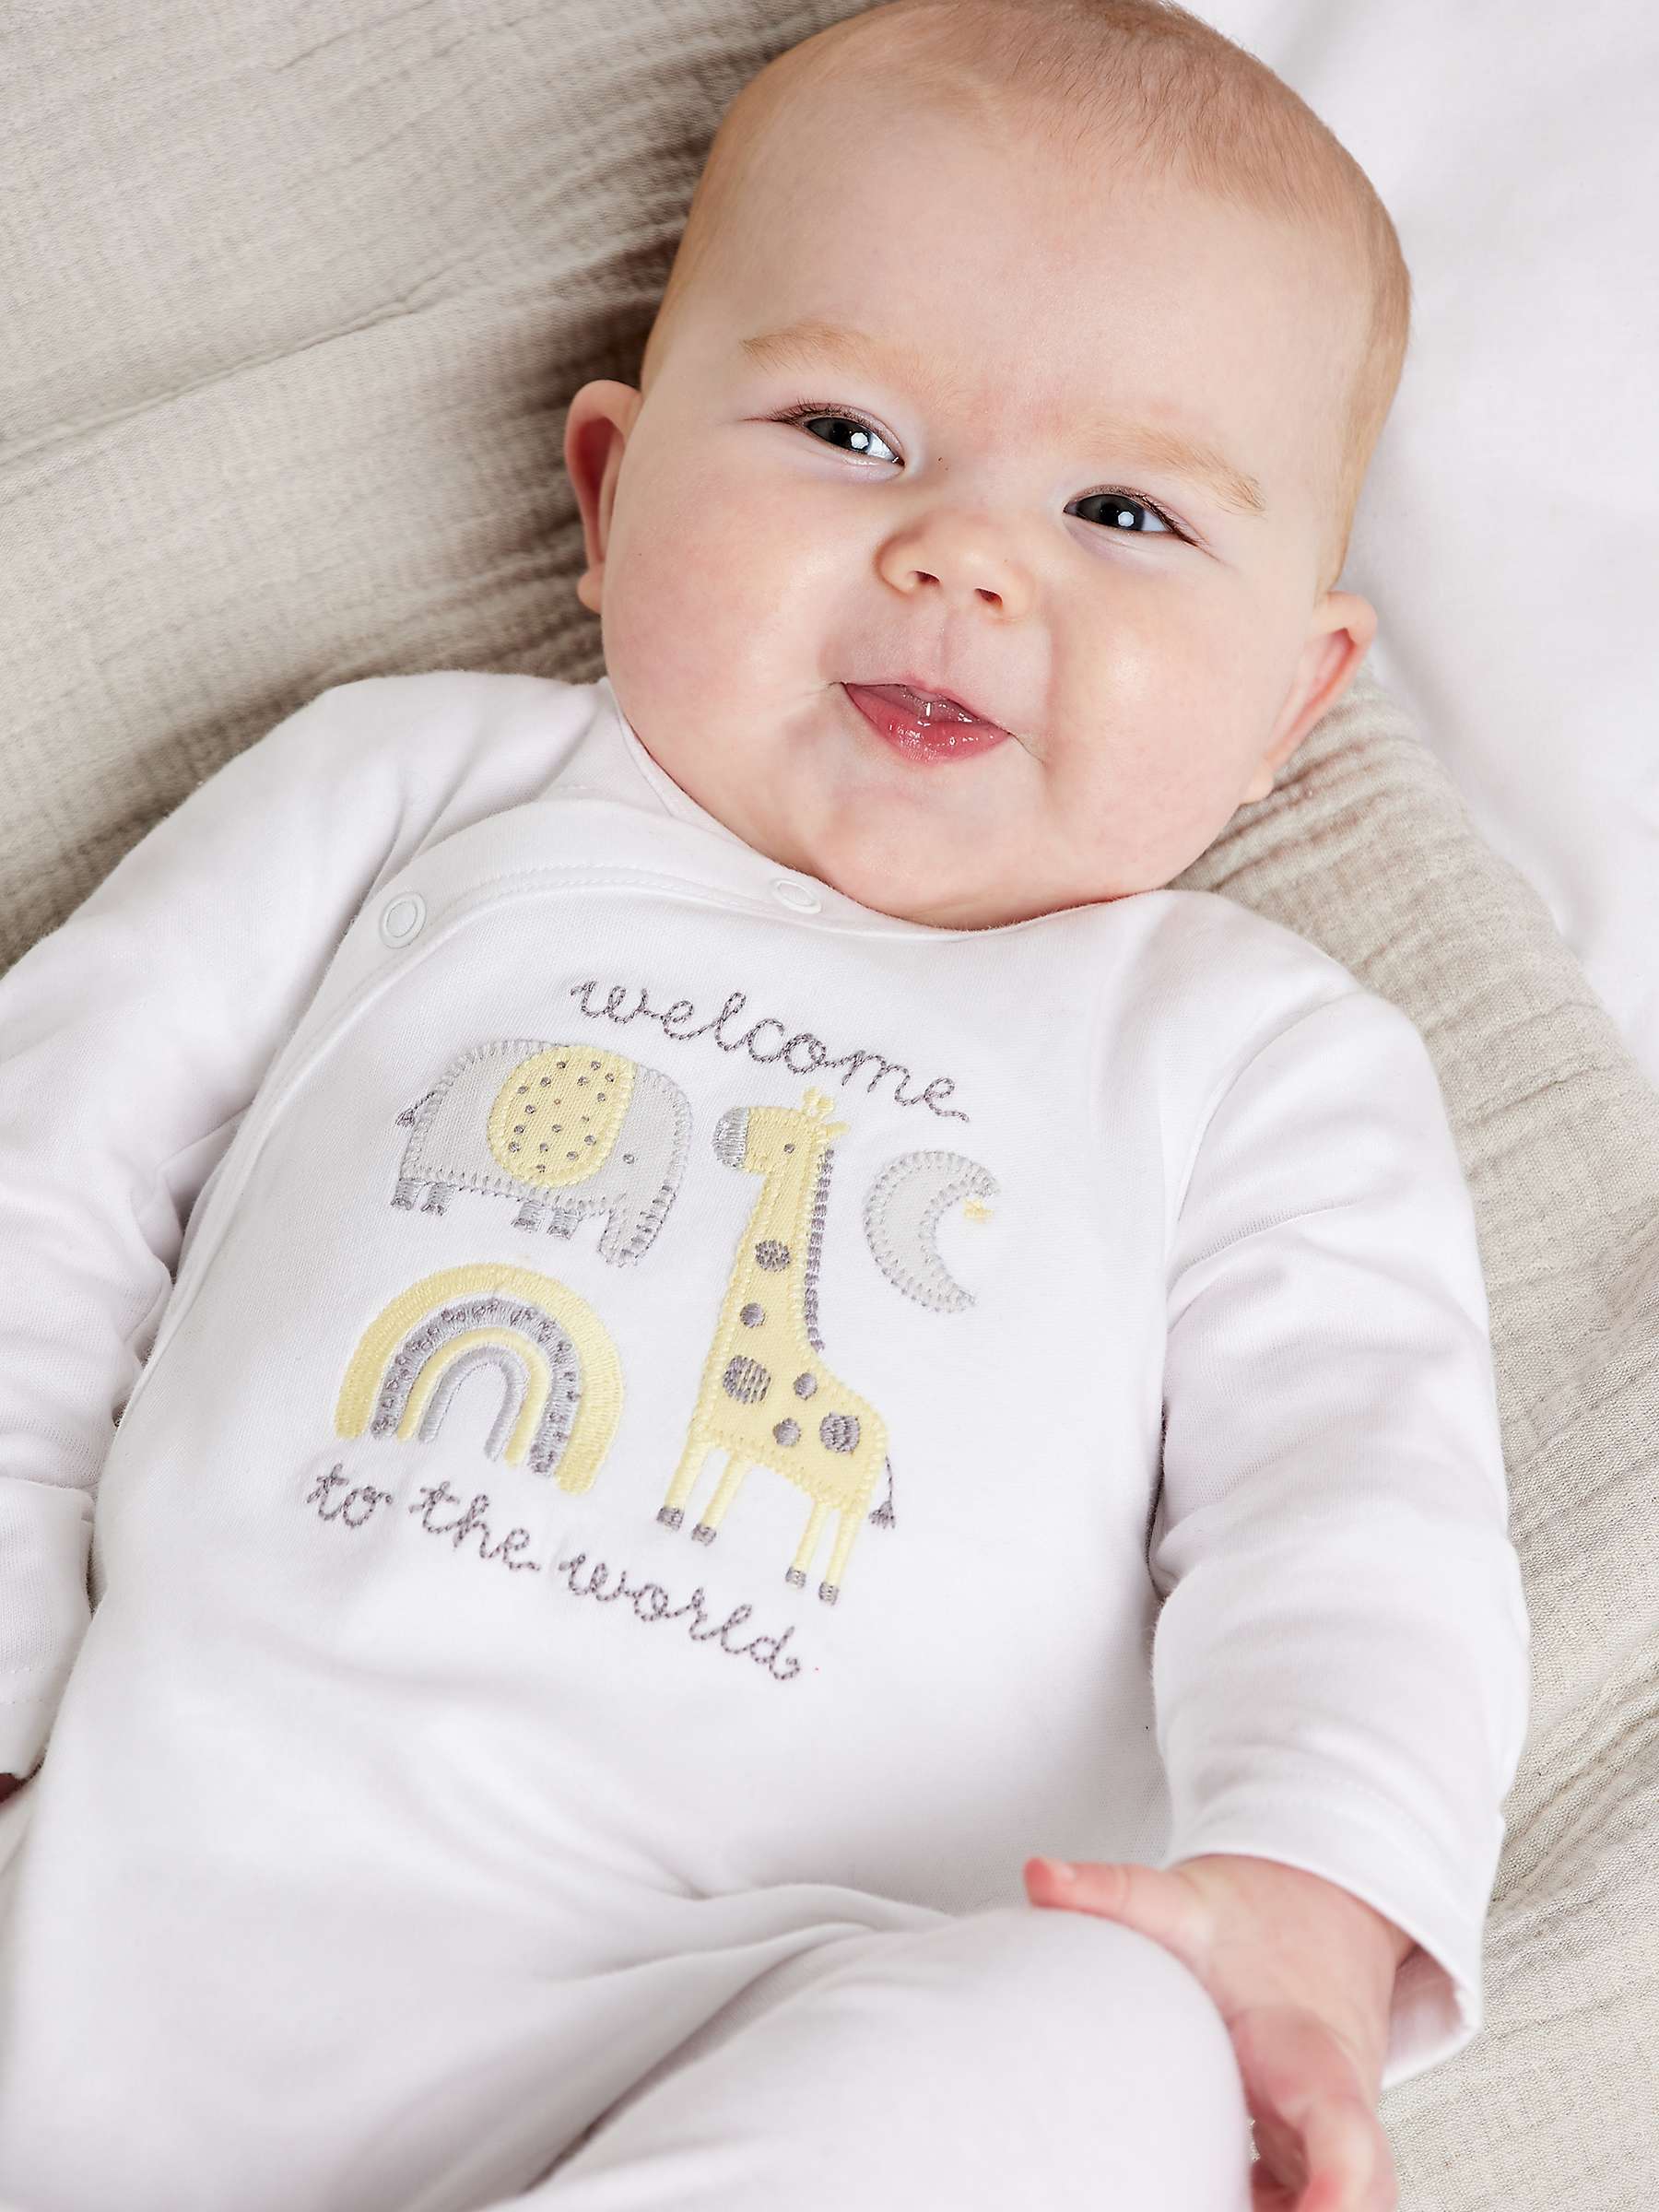 Buy Mini Cuddles Baby Welcome to the World Sleepsuit, White Online at johnlewis.com